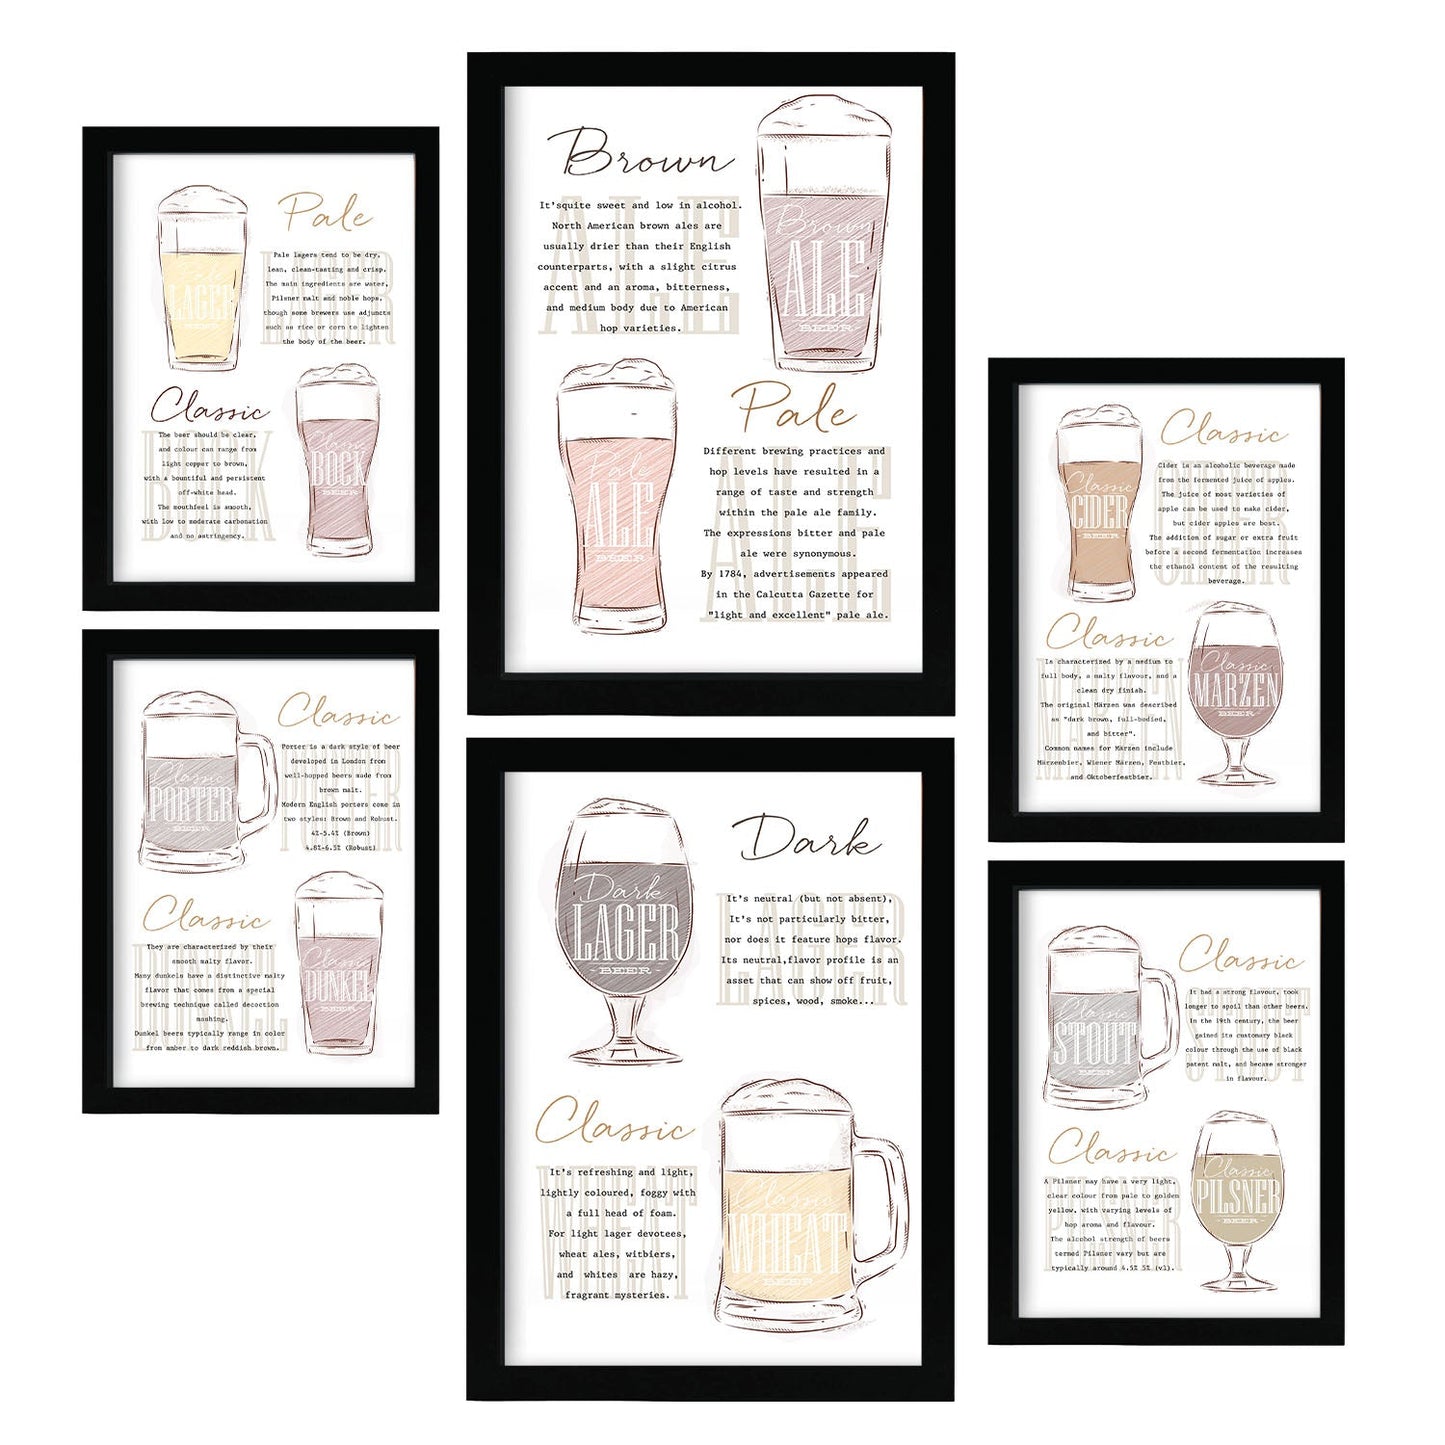 Nacnic TIPOS CERVEZA. Aesthetic Wall Art Prints for Bedroom or Living Room Design.